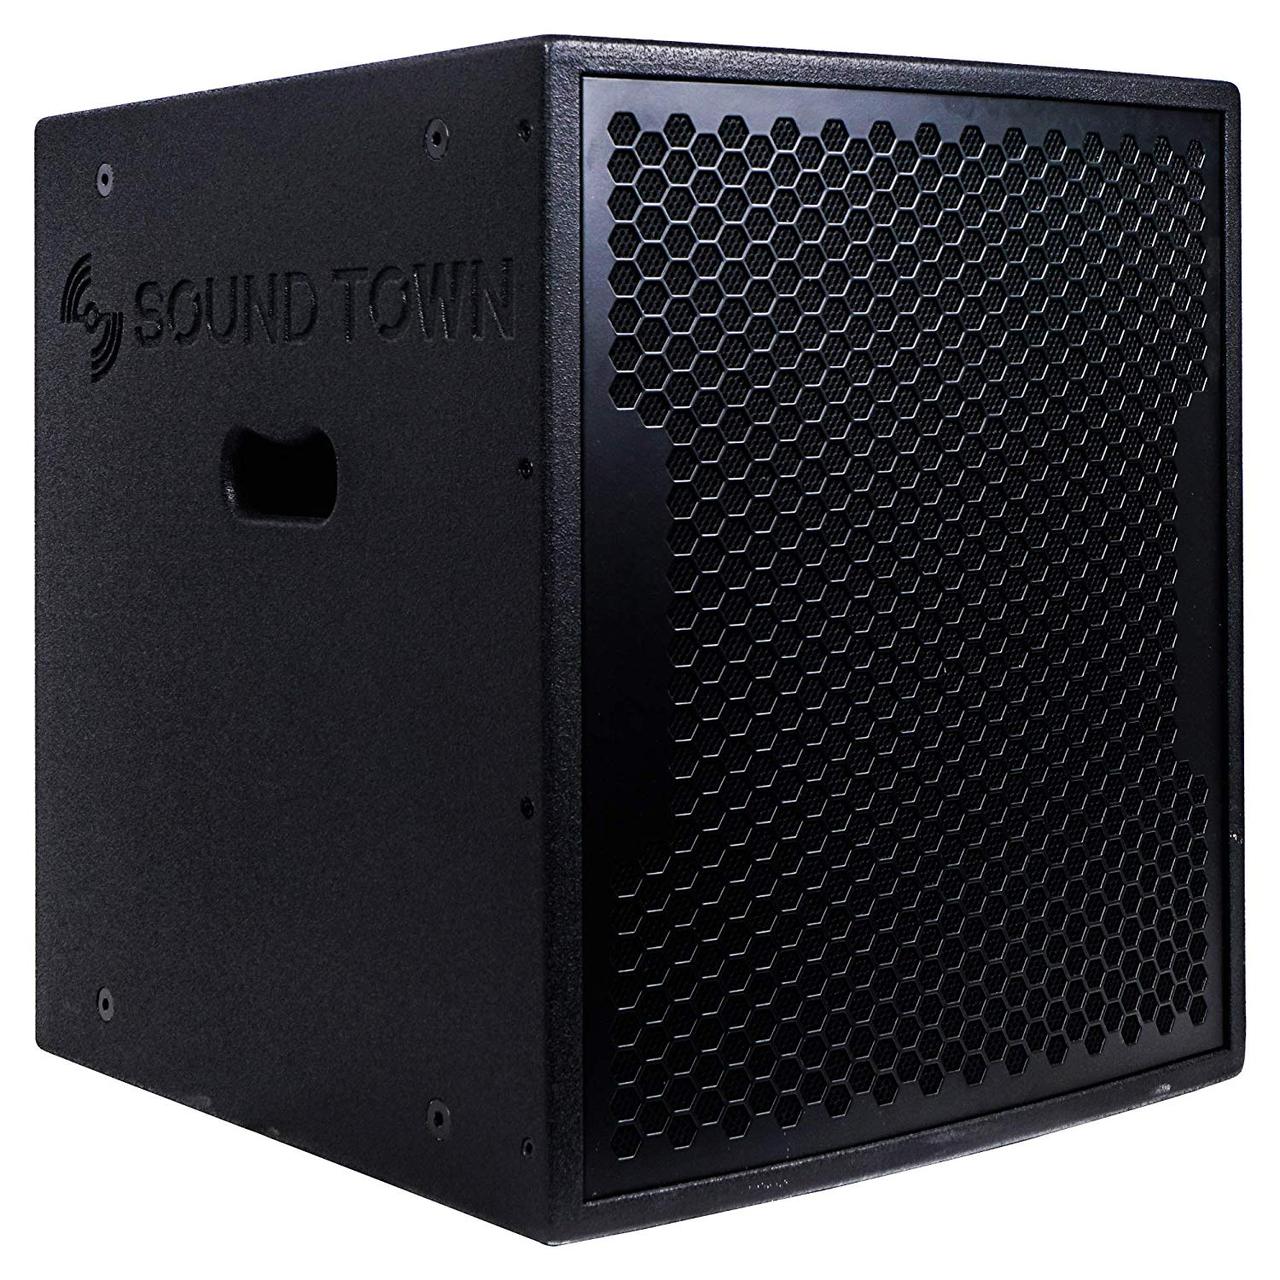 Sound Town 1600 Watts 15” Powered Subwoofer with 2 Speaker Outputs, Plywood Enclosure and 2 Wheels, Black (CARPO-15SPW) - image 1 of 6